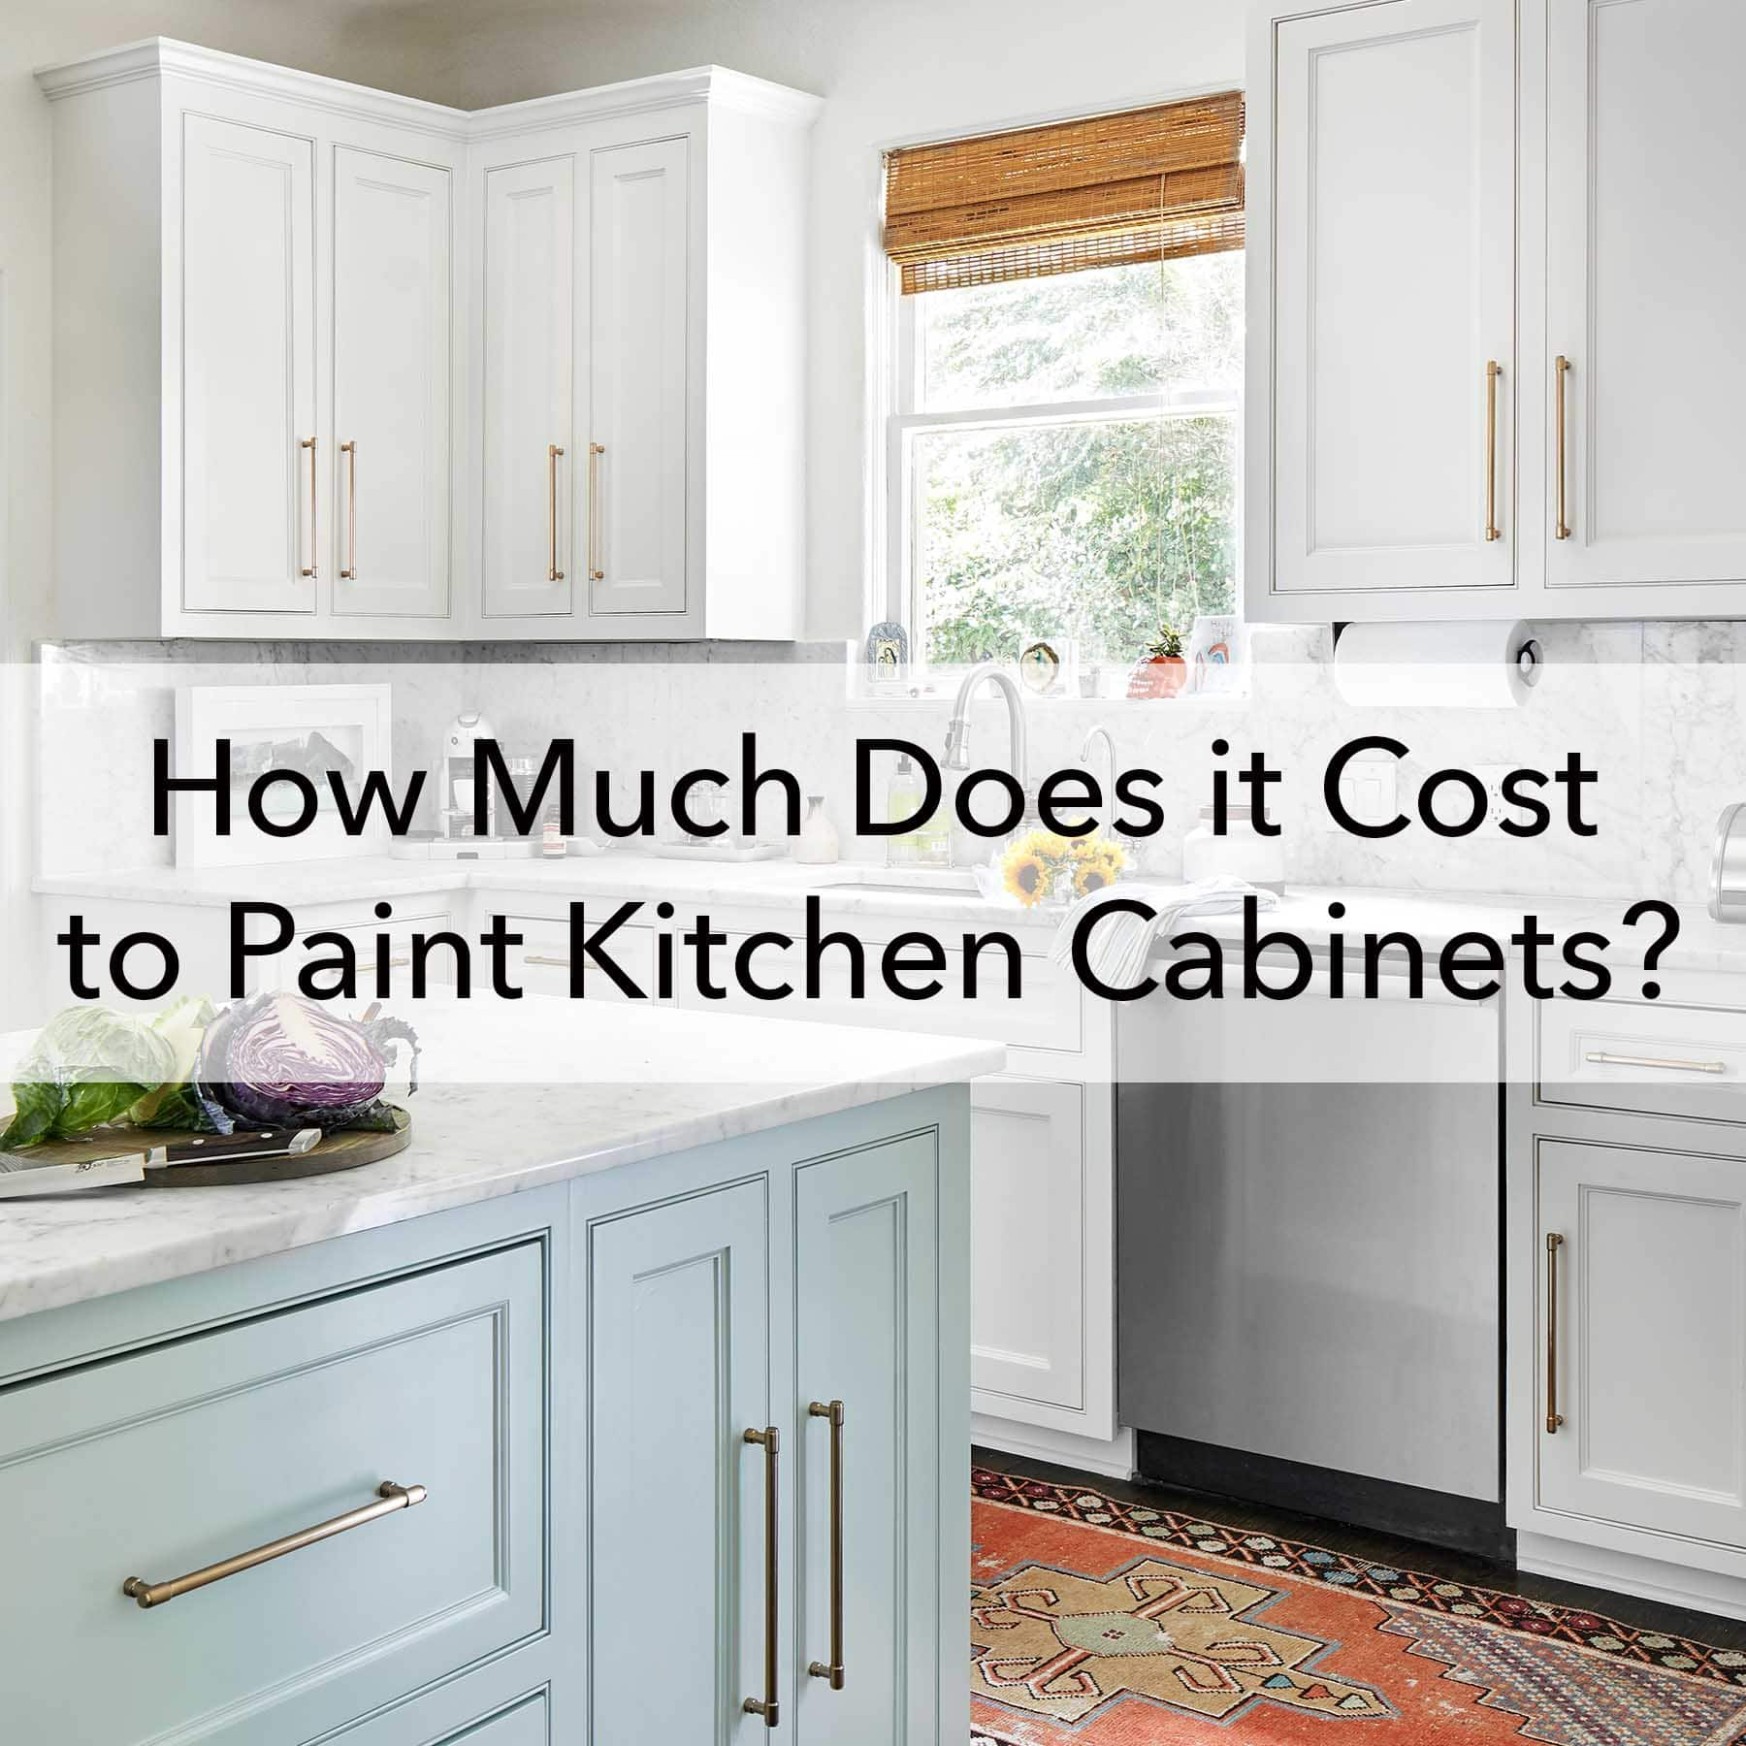 How Much does it Cost to Paint Kitchen Cabinets - Paper Moon Painting - how much does it cost for kitchen cabinets?